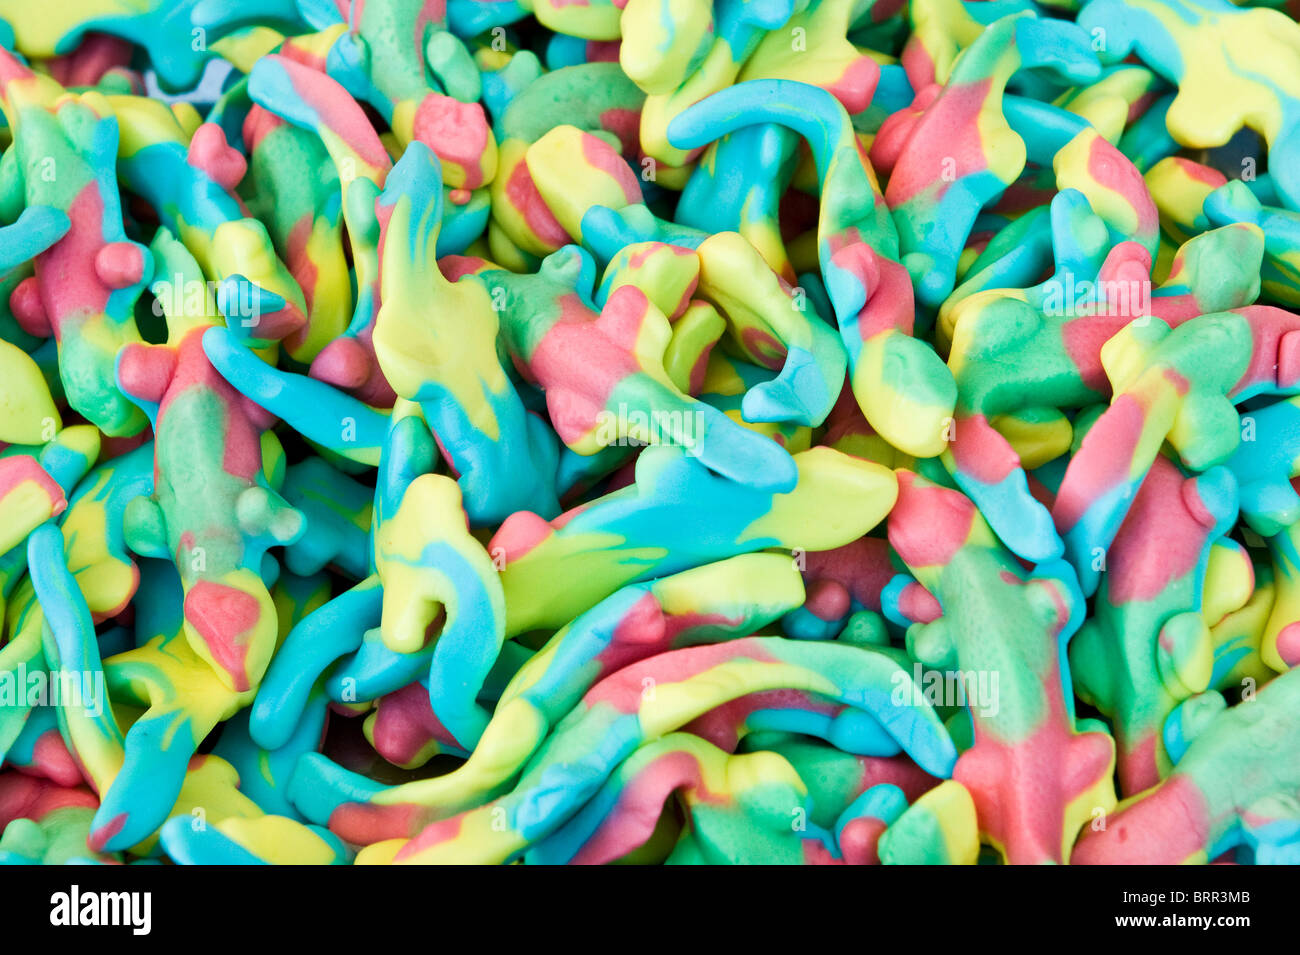 Close-up of multicoloured animal-shaped jelly candies Stock Photo